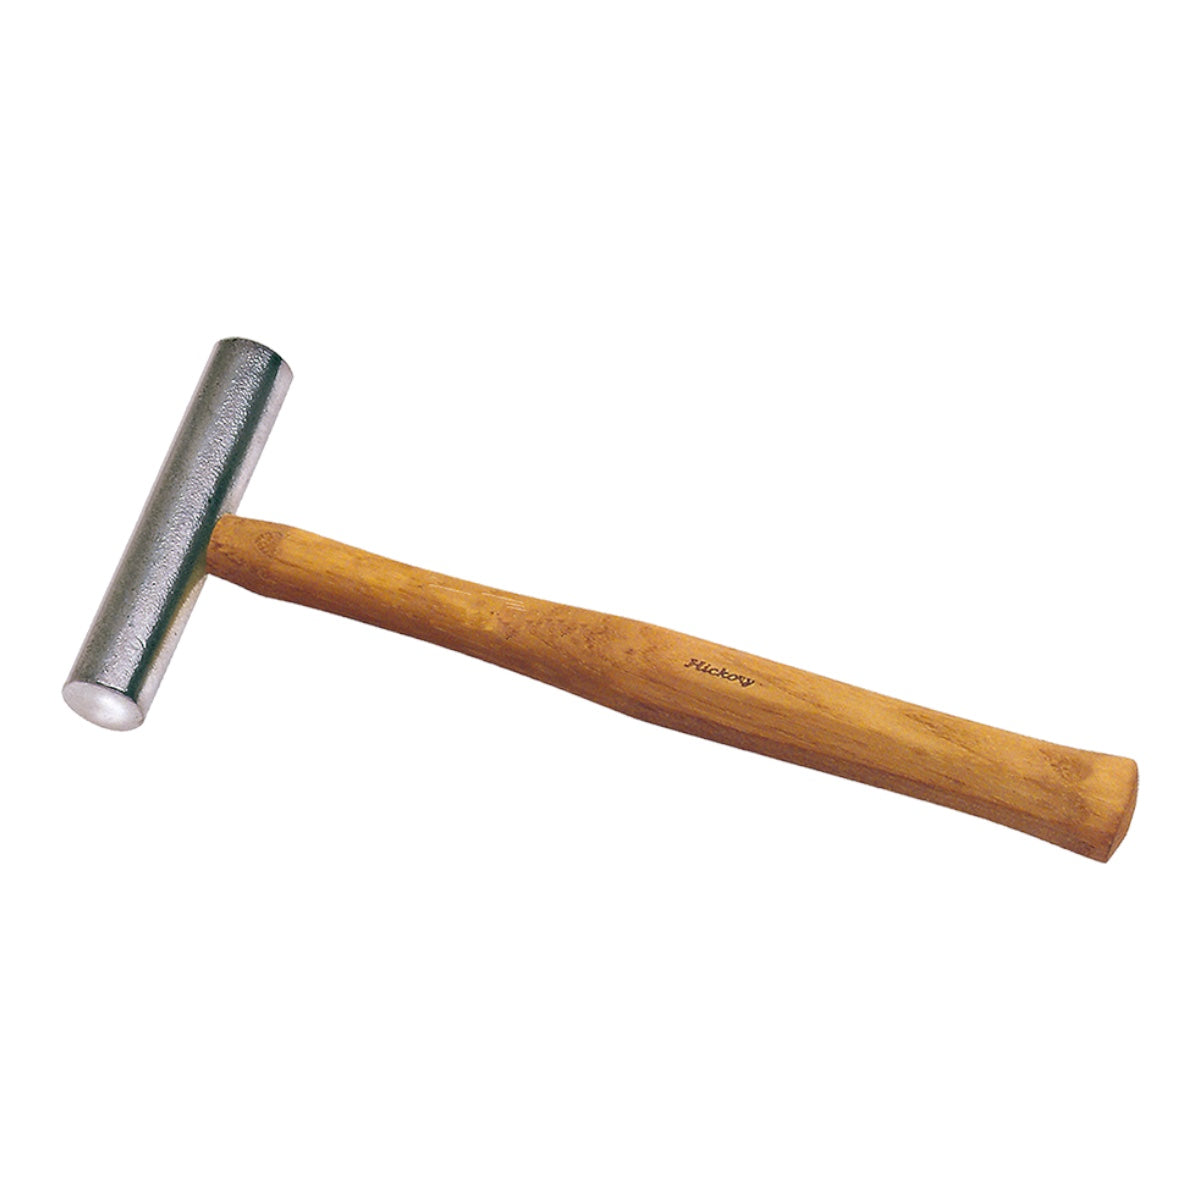 Hammer aluminum for dent removal 300 g with hickory handle